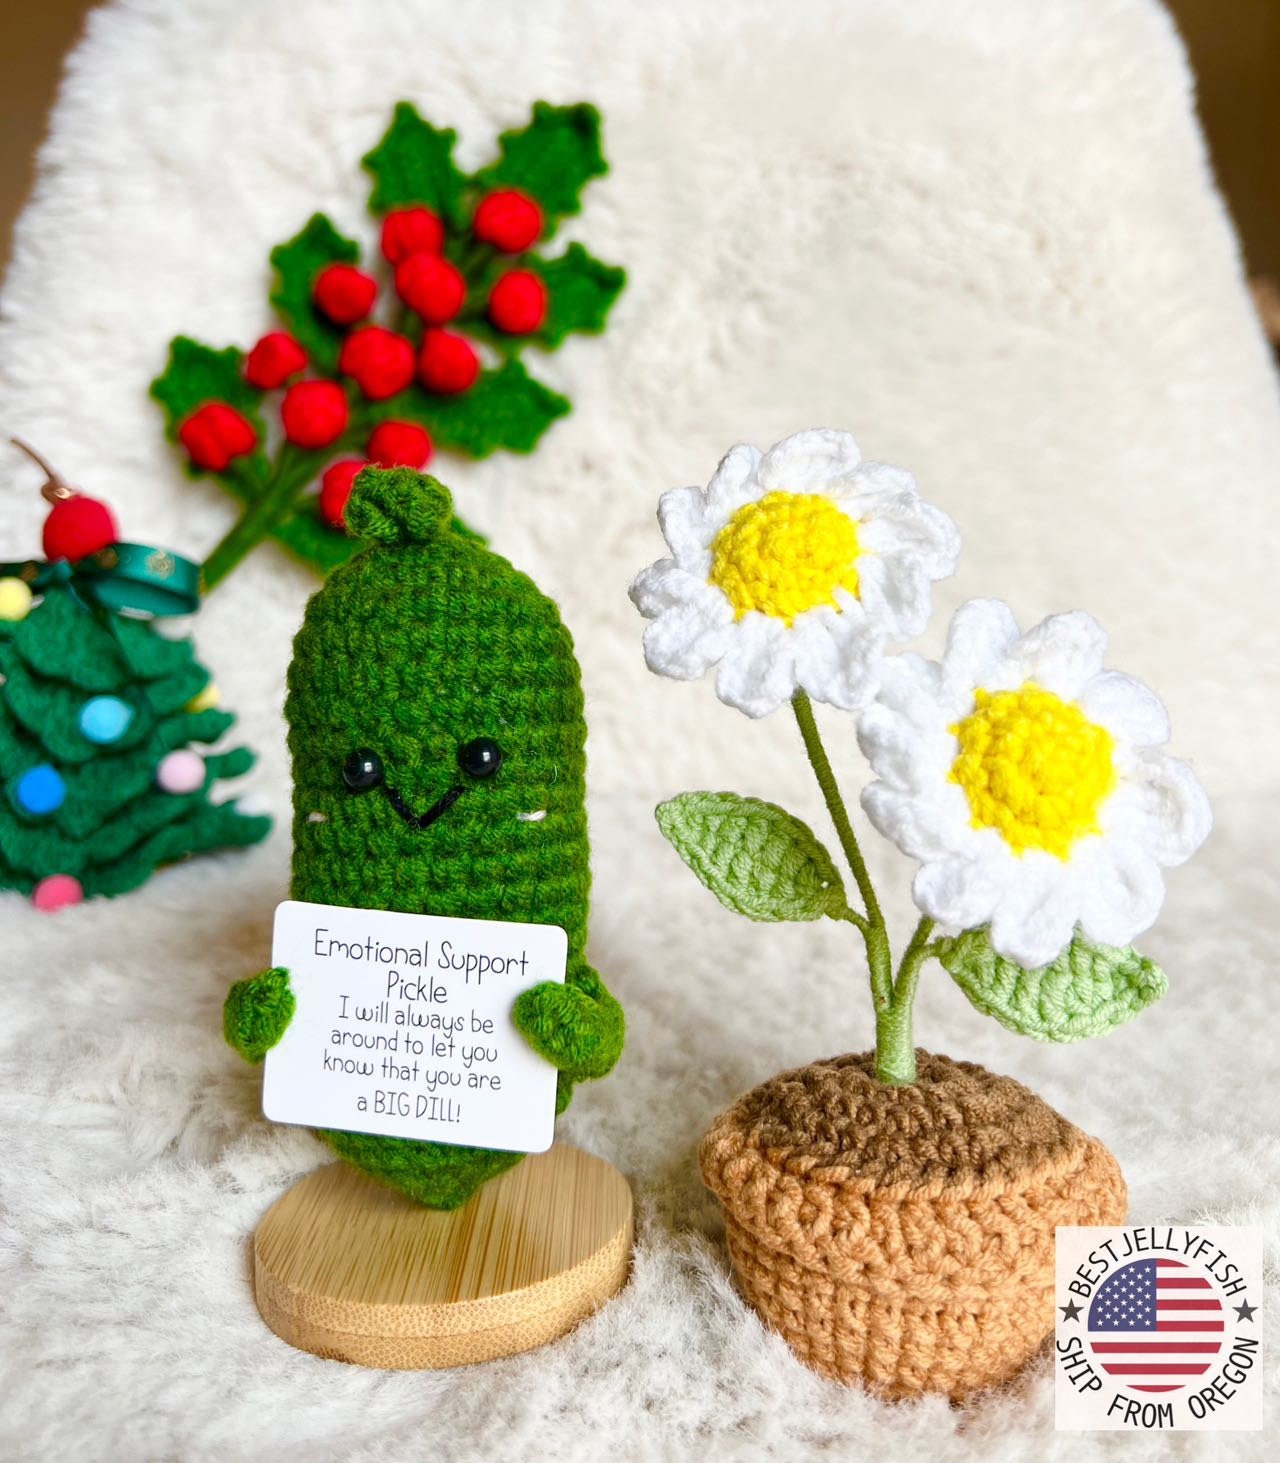 Pickle and Peanut Positive Support Friendship Crochet Set, Bromance, B –  The Bloom Crafter